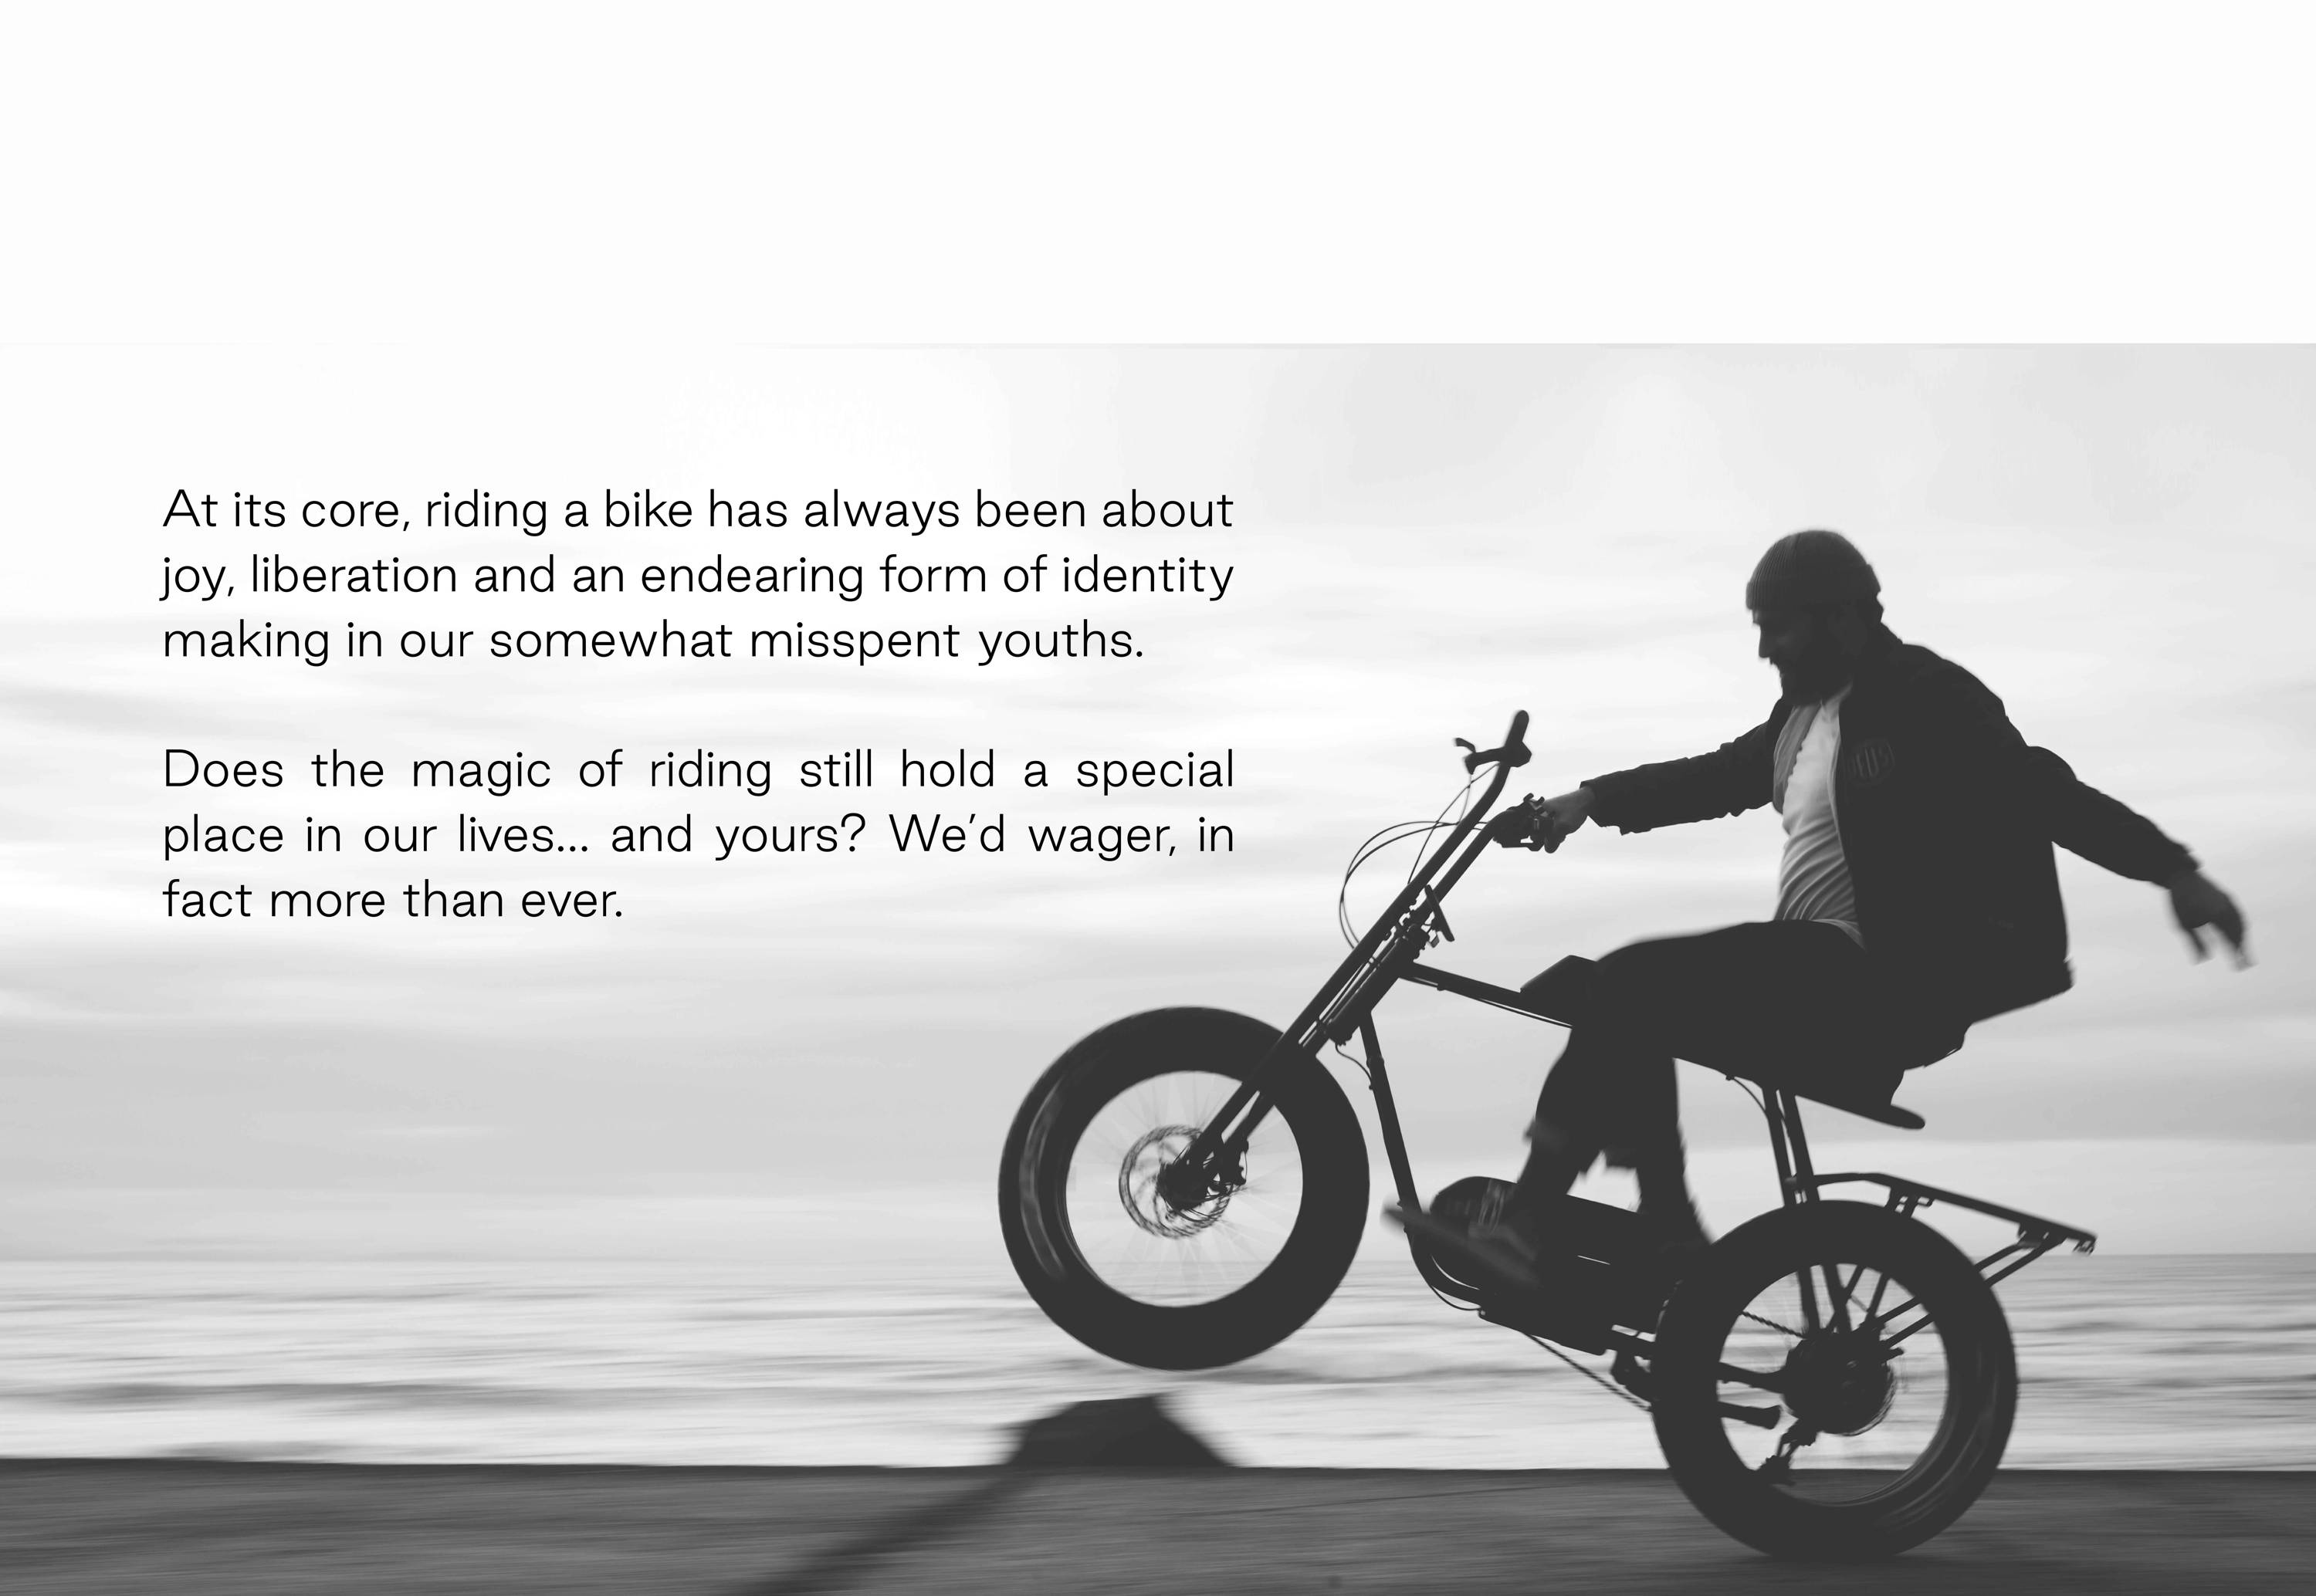 At its core, riding a bike has always been about joy, liberation and an endearing form of identity making in our somewhat misspent youths.  Does the magic of riding still hold a special place in our lives… and yours? We’d wager, in fact more than ever. 